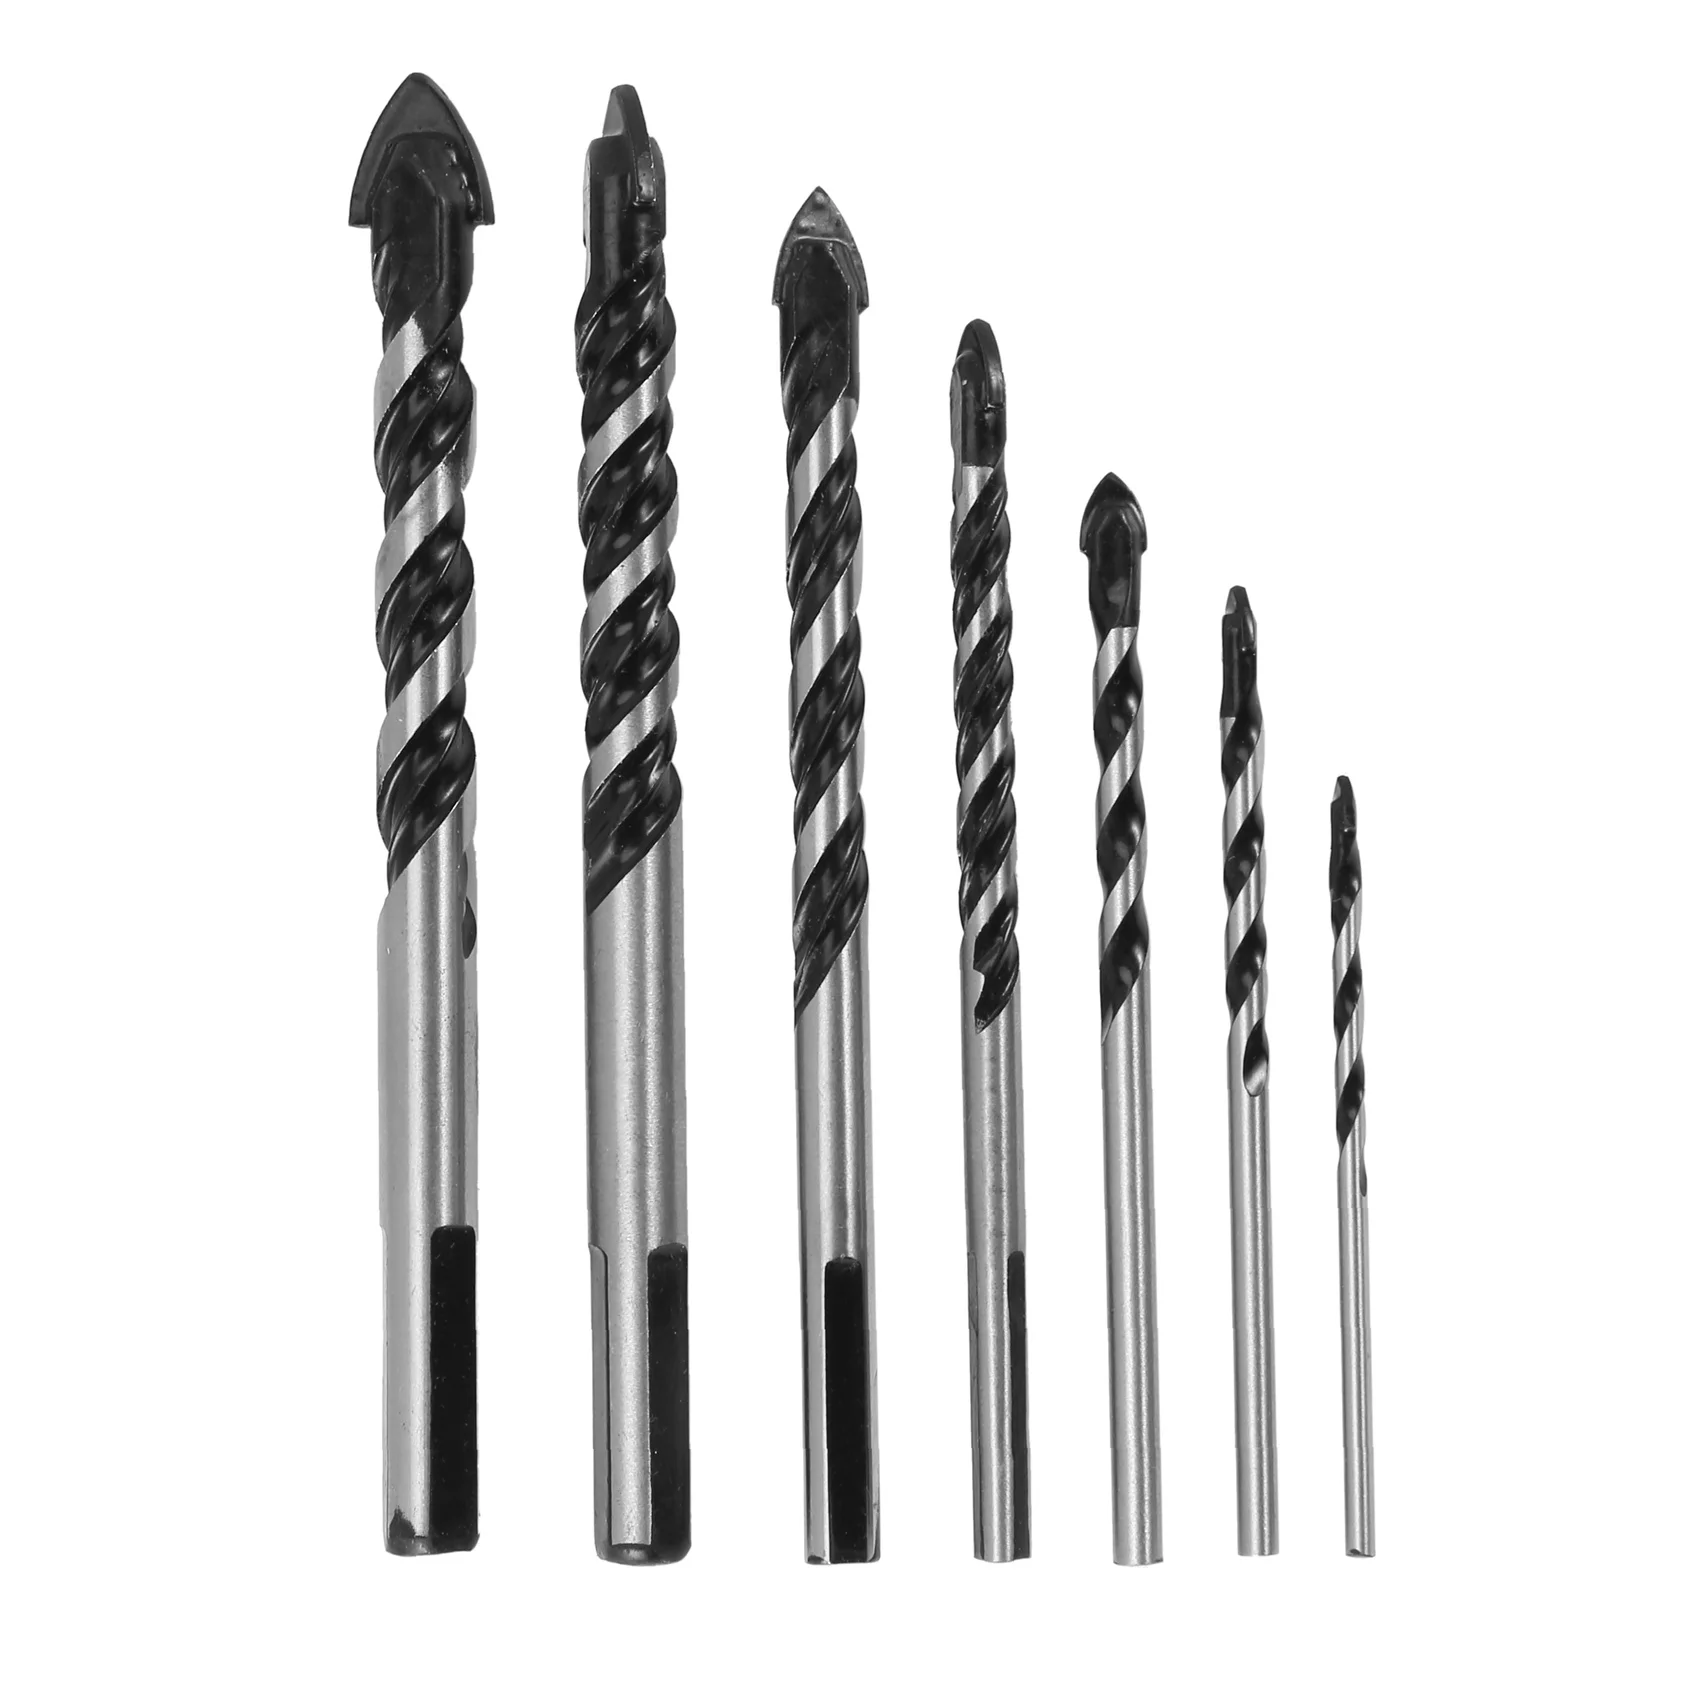 

Tungsten Carbide Drill Bit Set for Porcelain Ceramic Tile Concrete Brick Wall Glass Mirrors Plastic Masonry and Wood (3 4 5 6